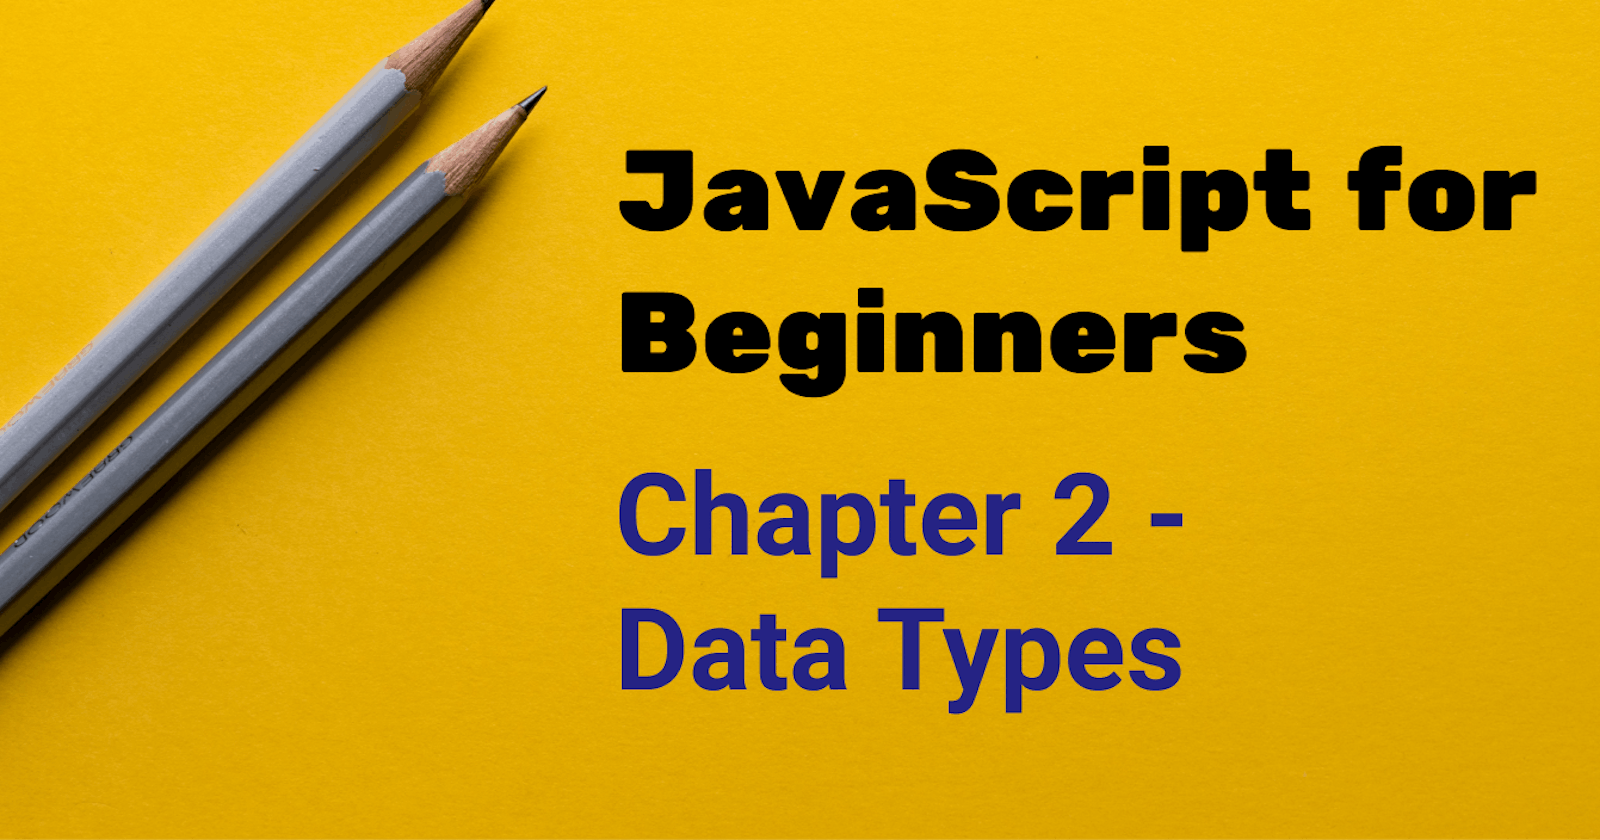 Chapter 2 - Data Types